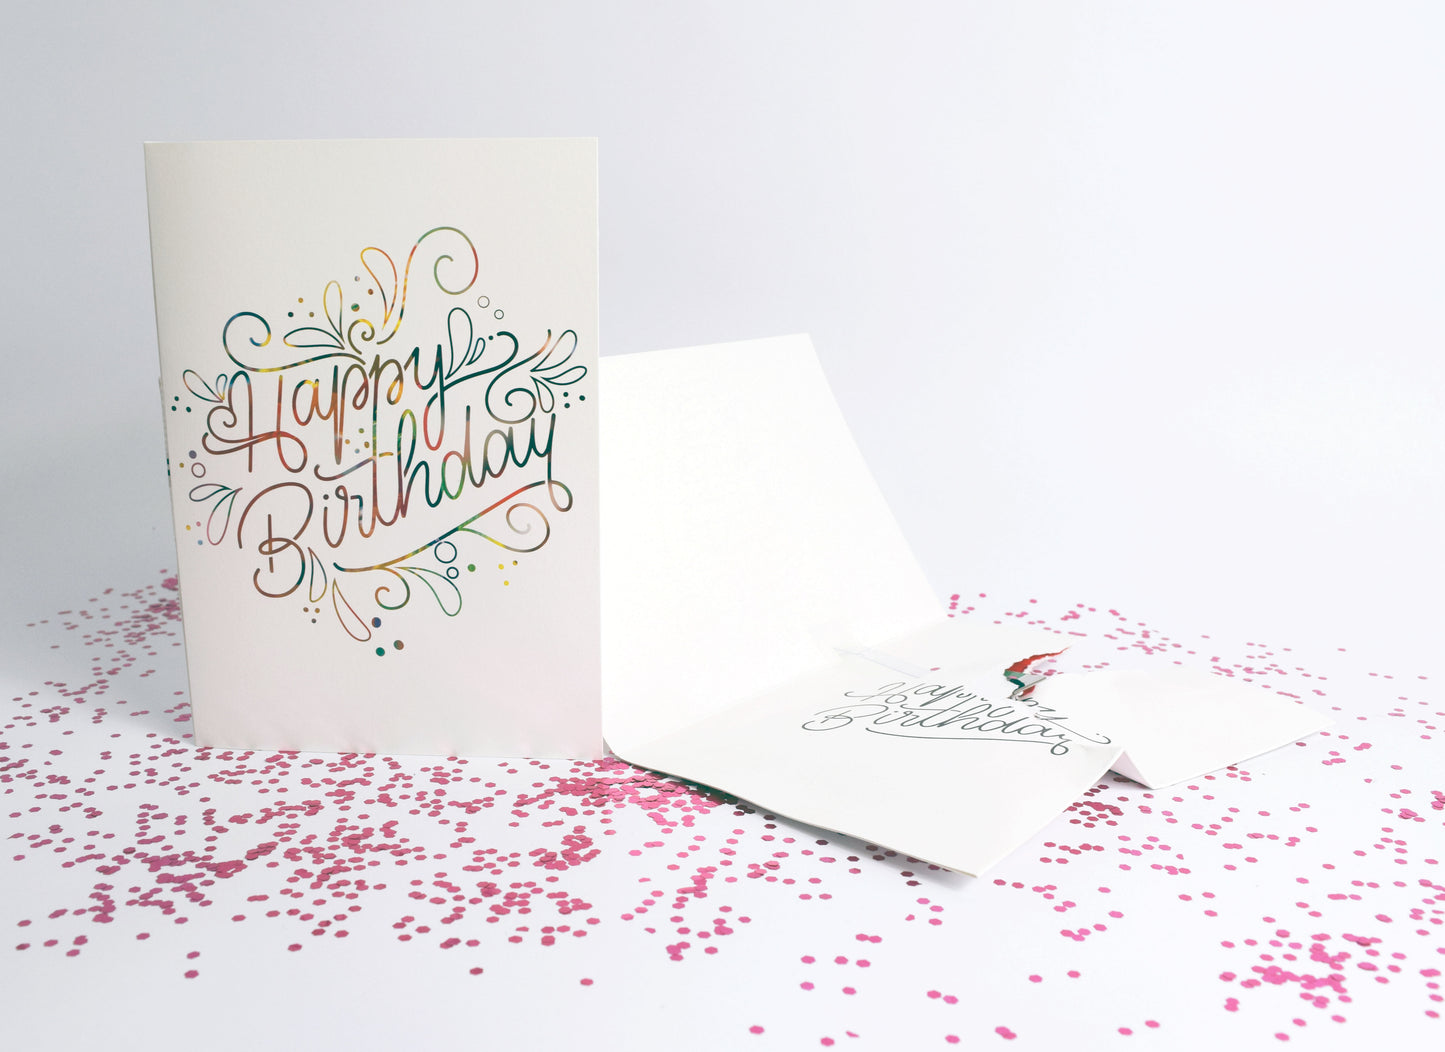 The Offensive NSFW Never-Ending Sex Noise Birthday Card ADULT Prank + Glitter